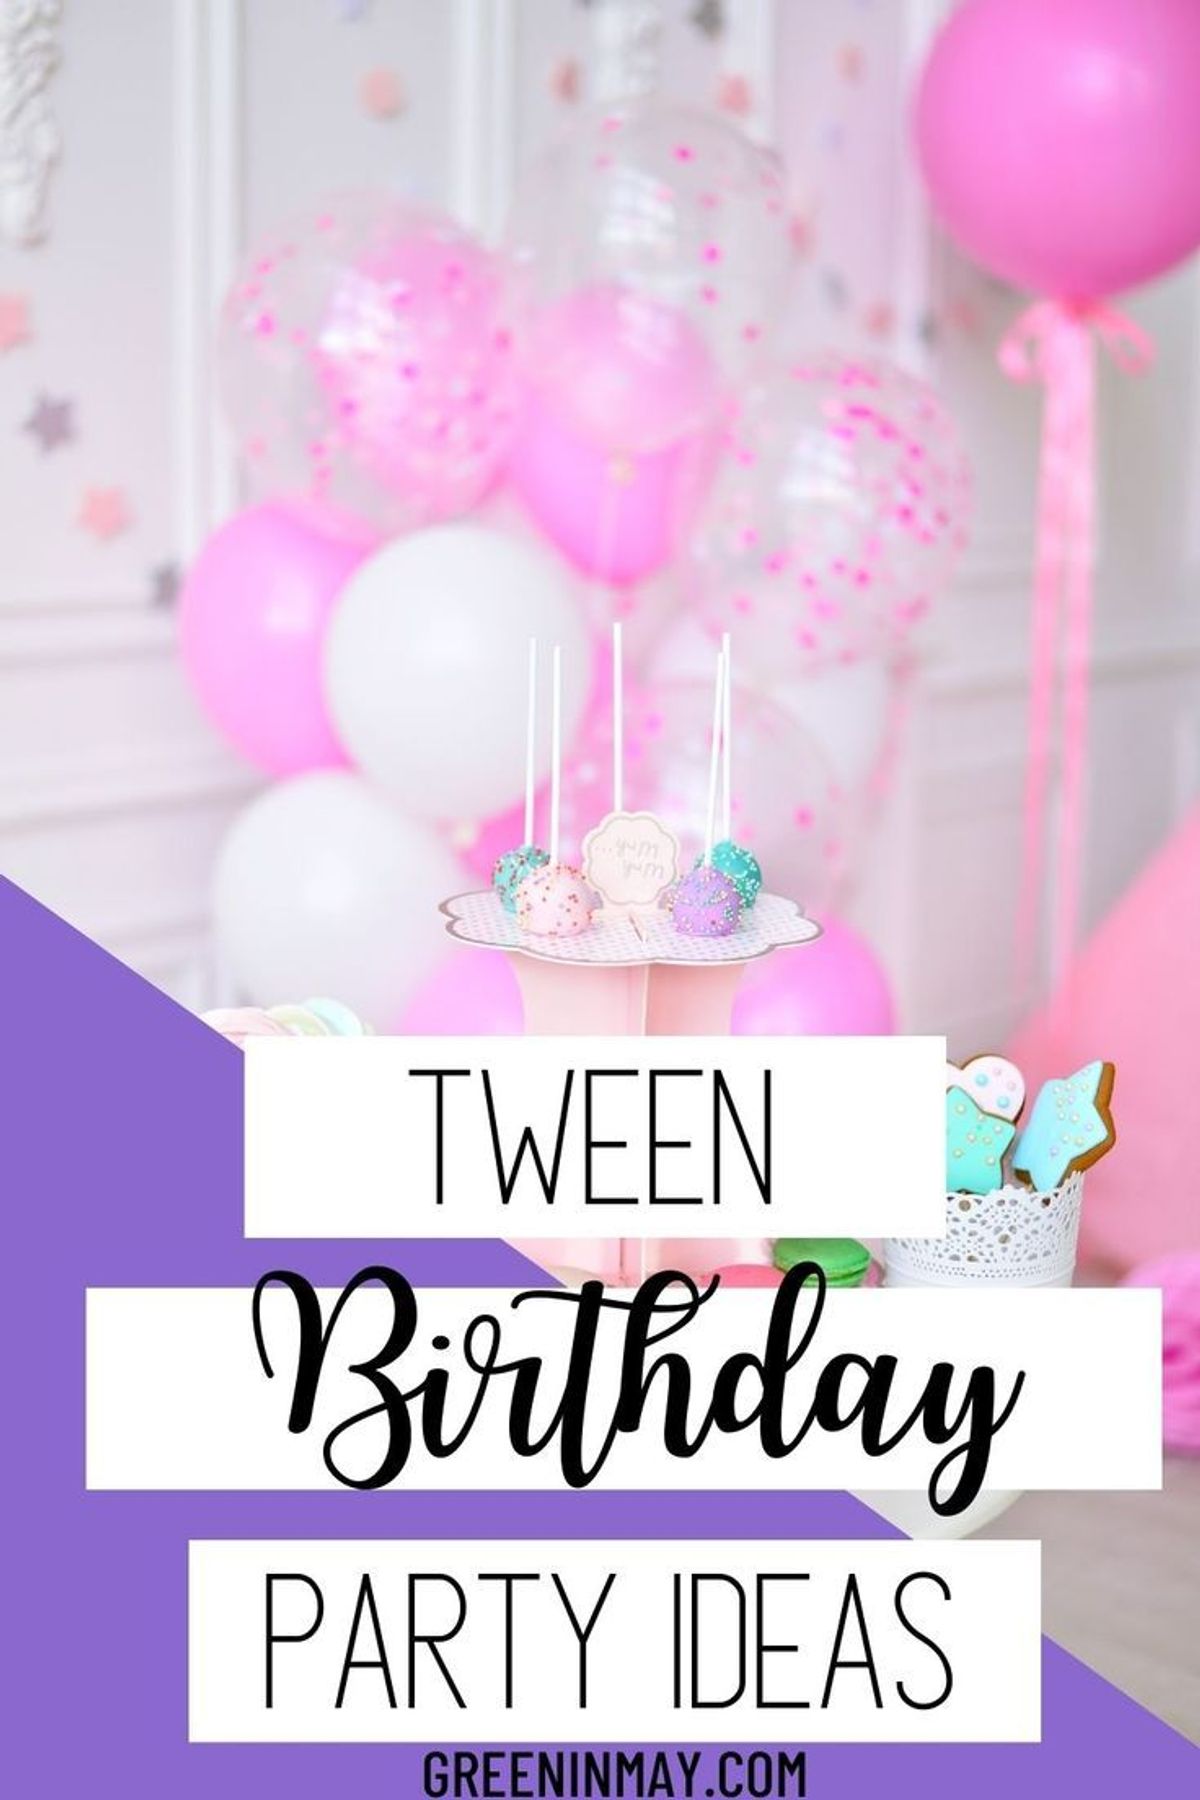 My favorite ideas for ten year old birthday party ideas